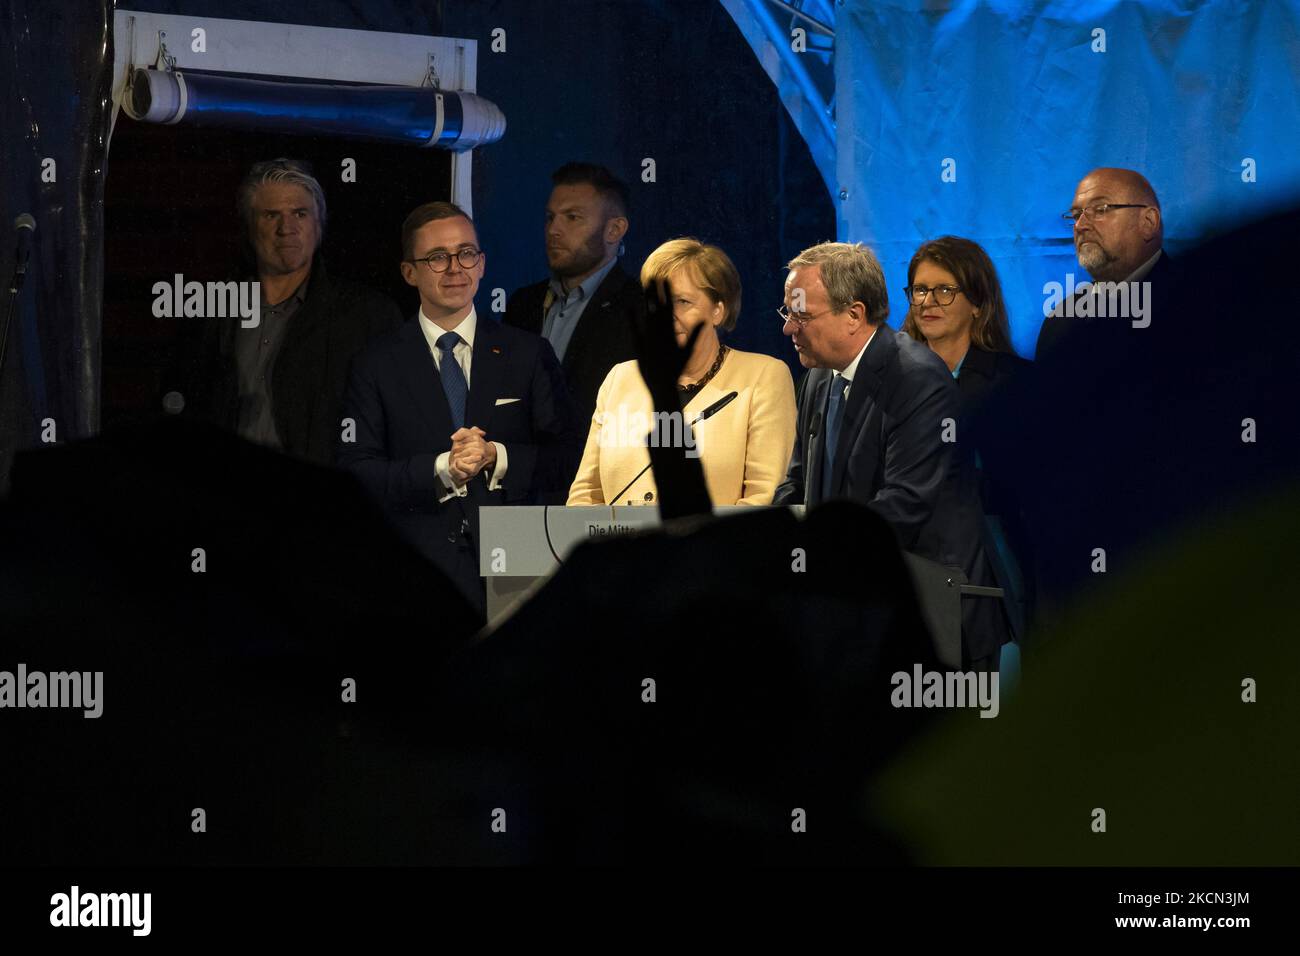 German Chancellor Angela Merkel and chancellor candidate of Germany's conservative Christian Democratic Union (CDU) party Armin Laschet attend a campaign rally in Stralsund, Mecklenburg-Western Pomerania, in Germany on September 21, 2021, a few days before general elections. (Photo by Emmanuele Contini/NurPhoto) Stock Photo